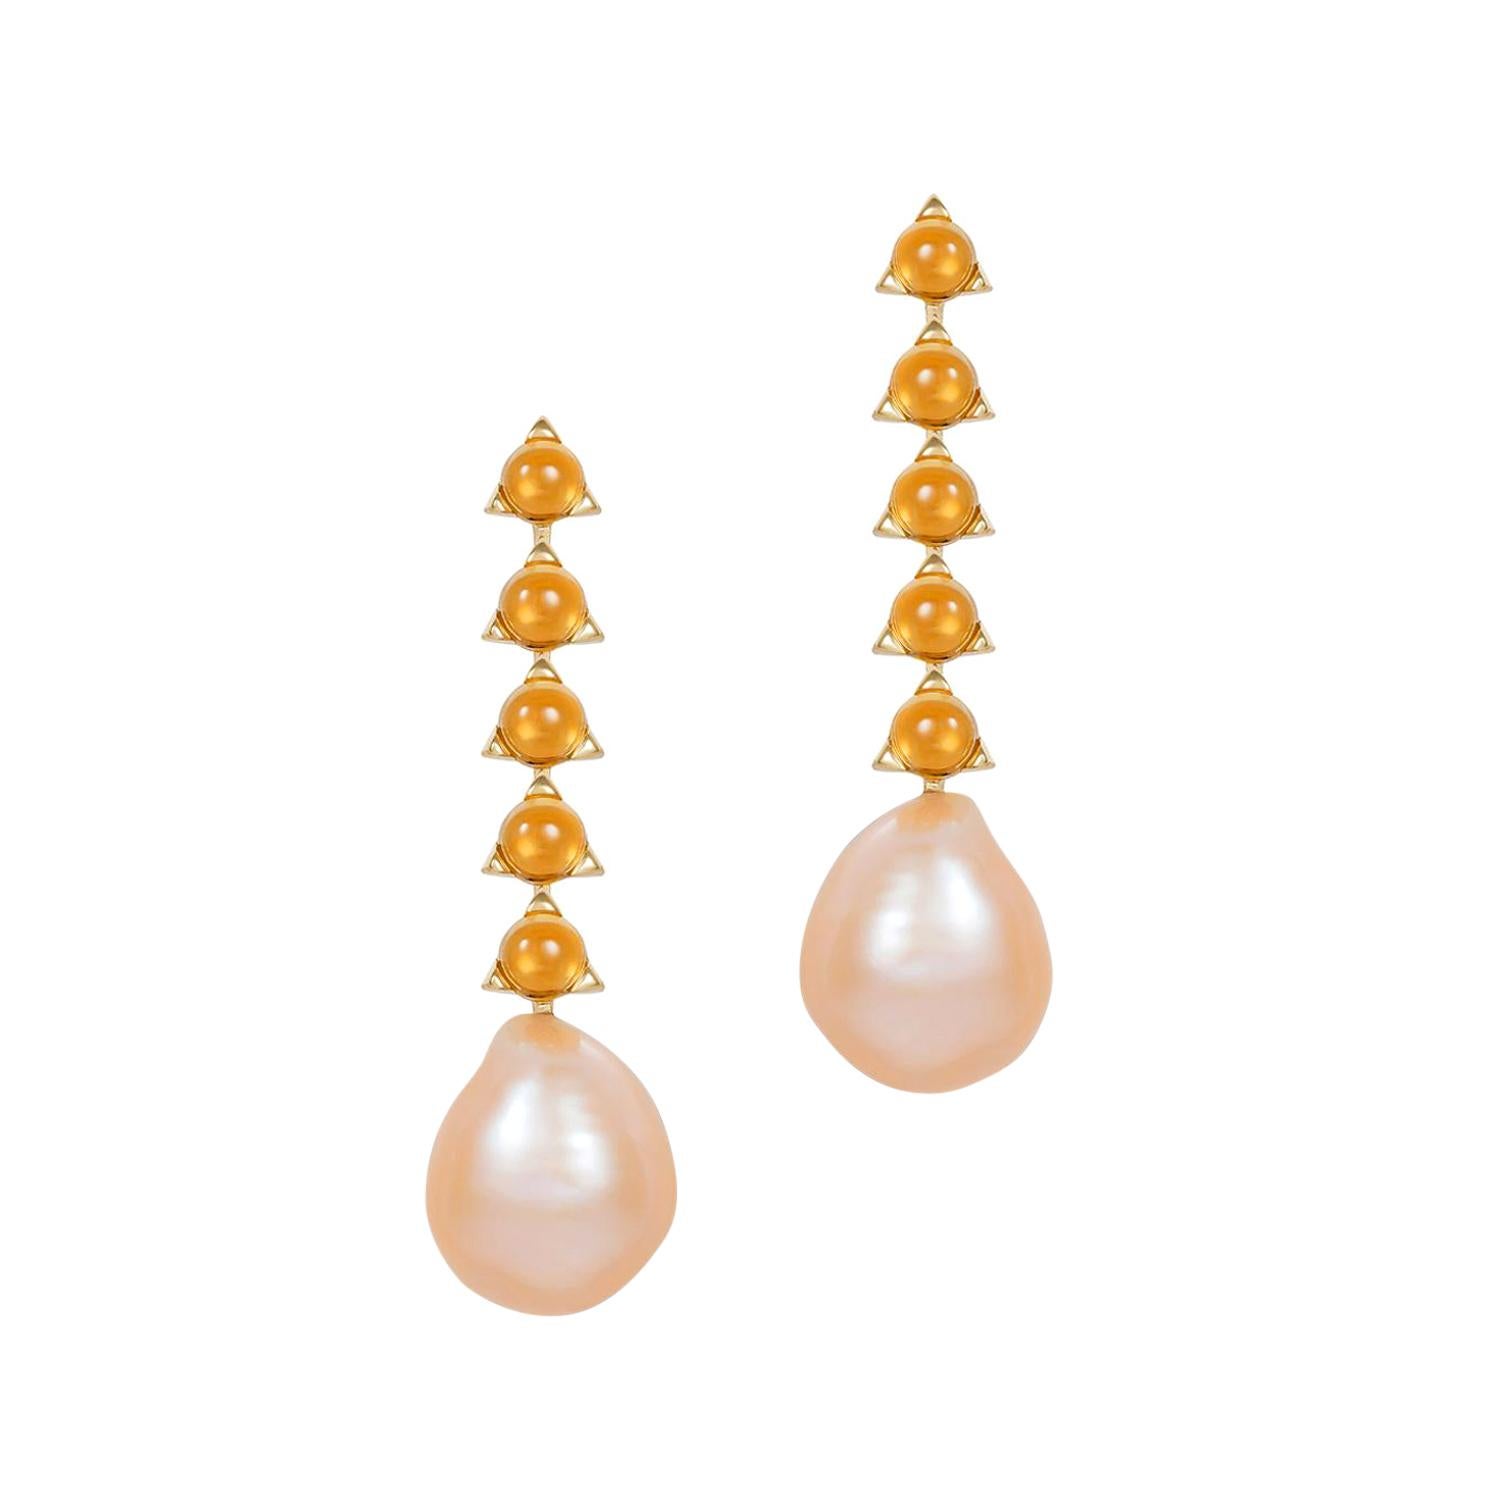 5- 4mm Stone Baroque Peach/Violet Pearl Earrings, Citrine, 18 Karat Yellow Gold For Sale